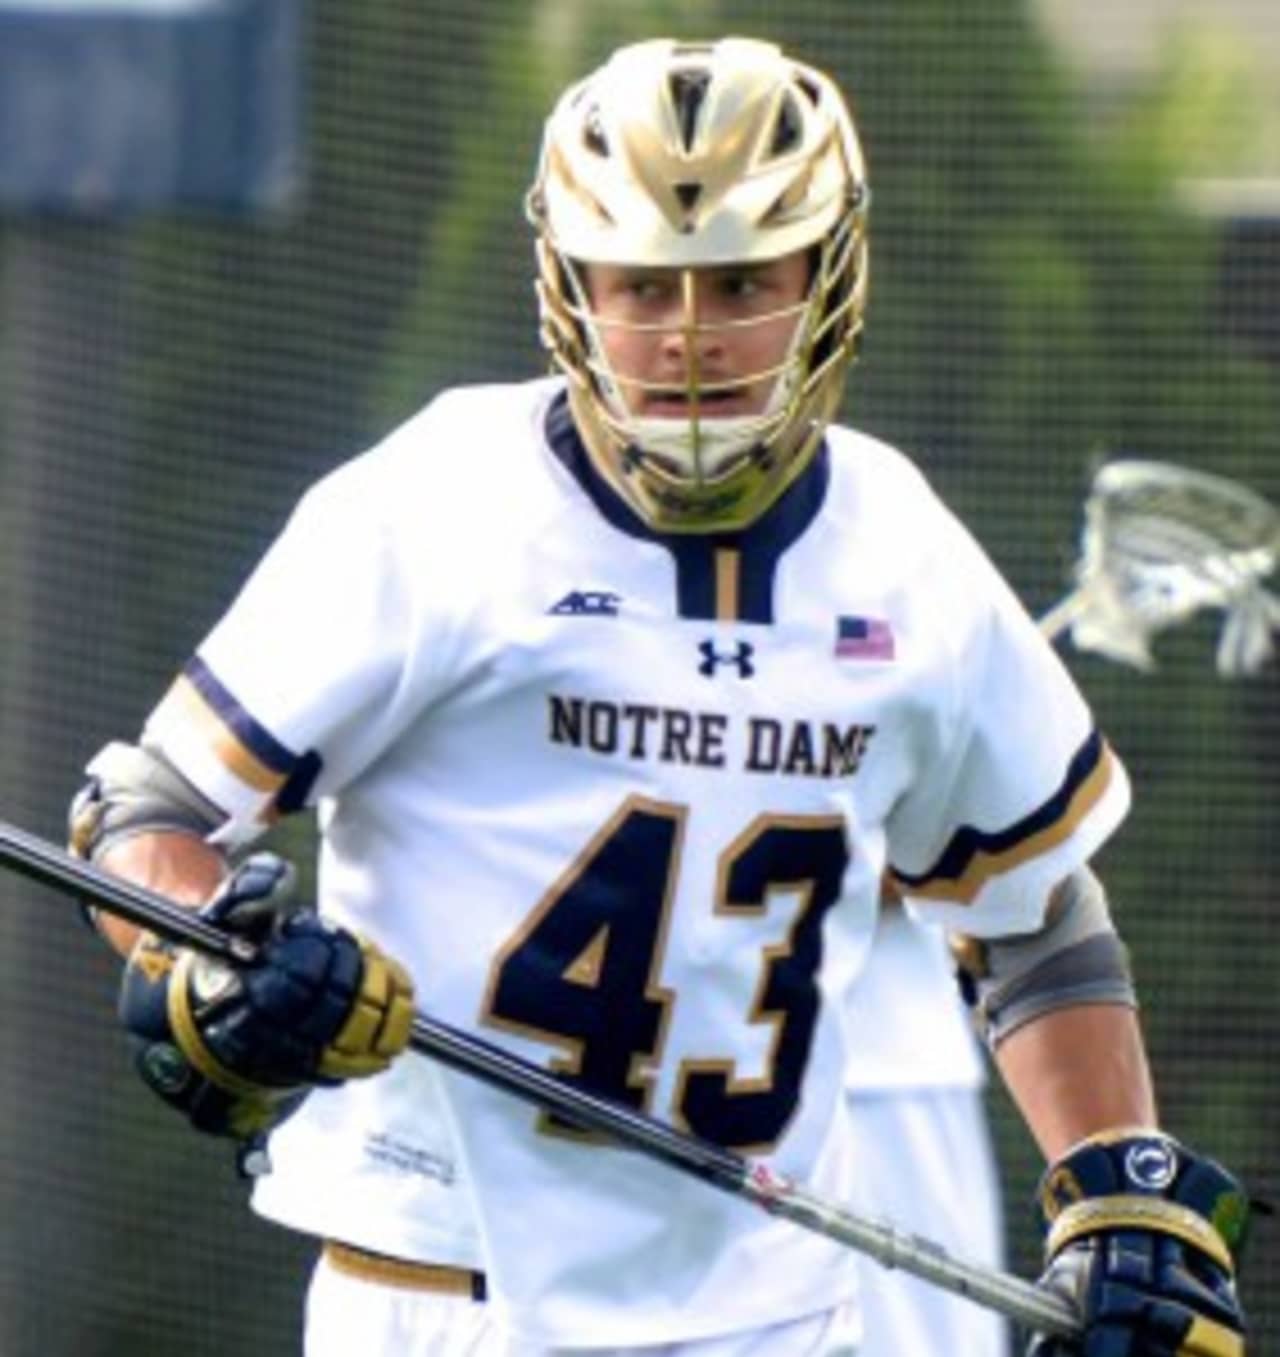 Pelham native Matt Landis will try to help Notre Dame win the NCAA men's lacrosse championship this weekend.